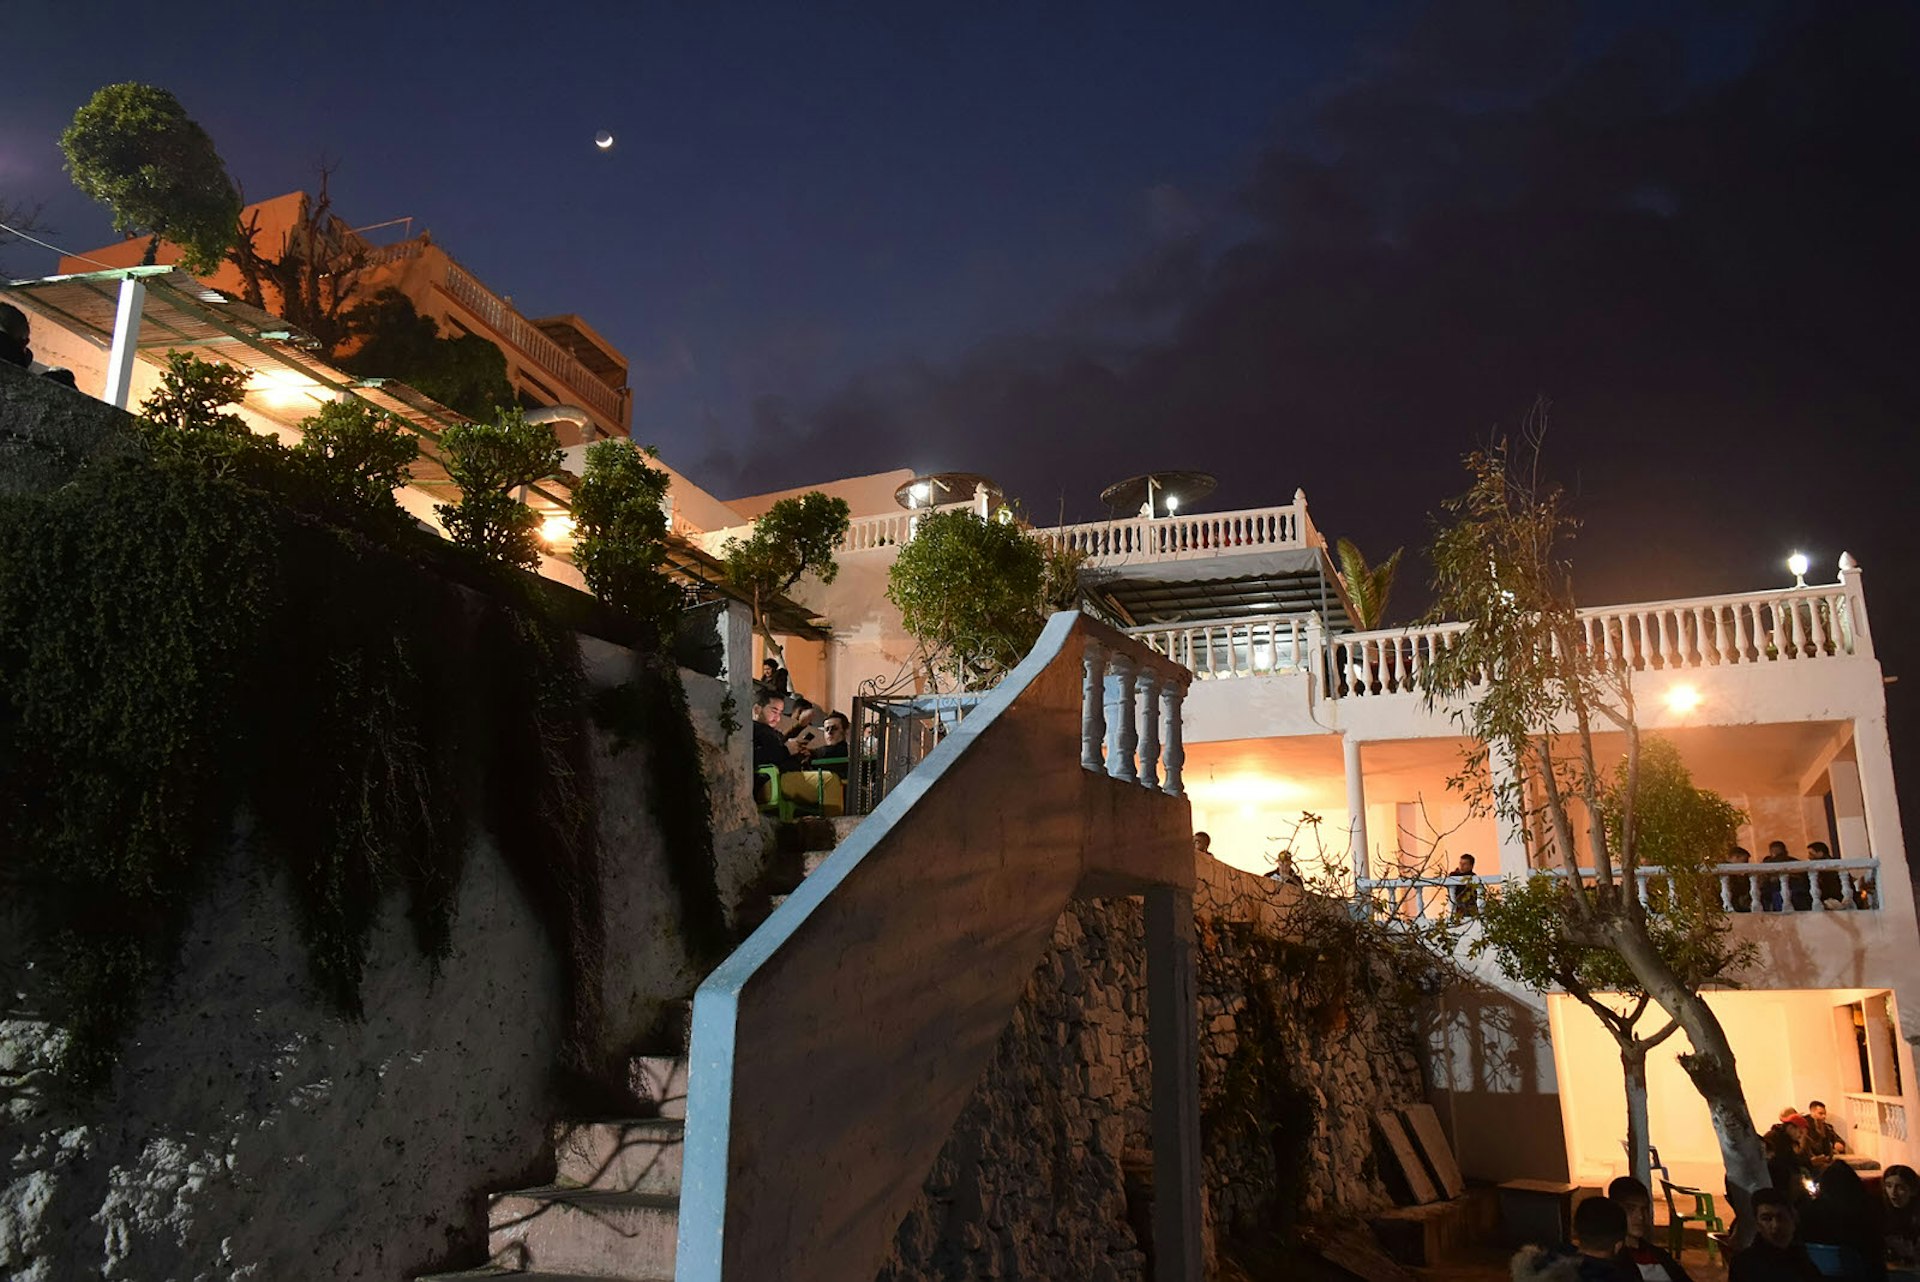 Café Hafa at night, Tangier, Morocco. Image by Jessica Cherkaoui / Lonely Planet